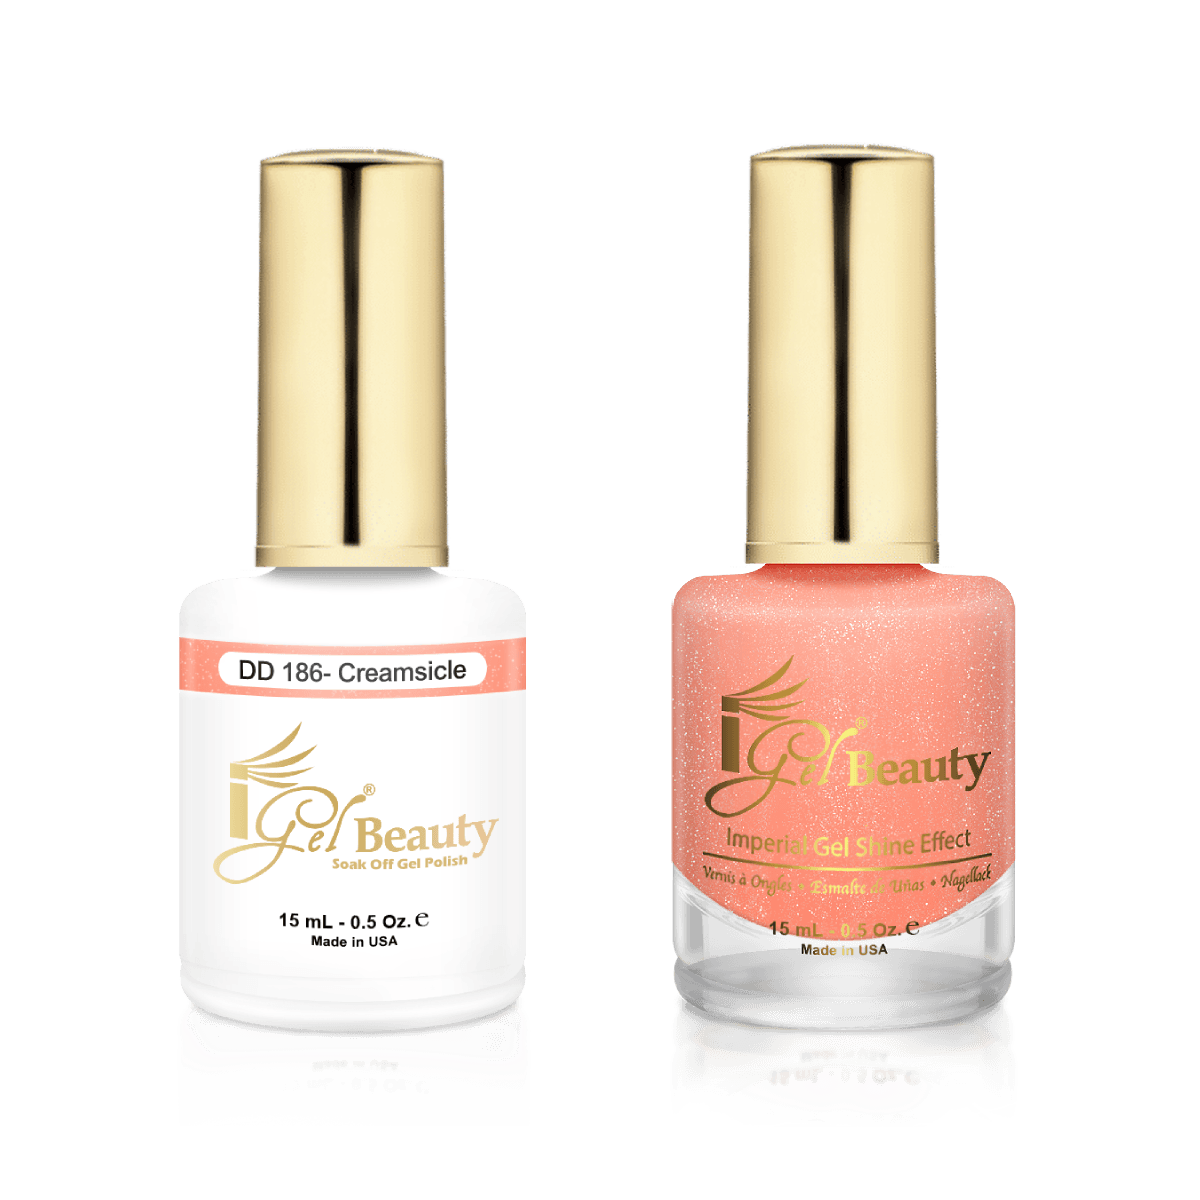 IGel Duo Gel Polish + Matching Nail Lacquer DD 186 CREAMSICLE